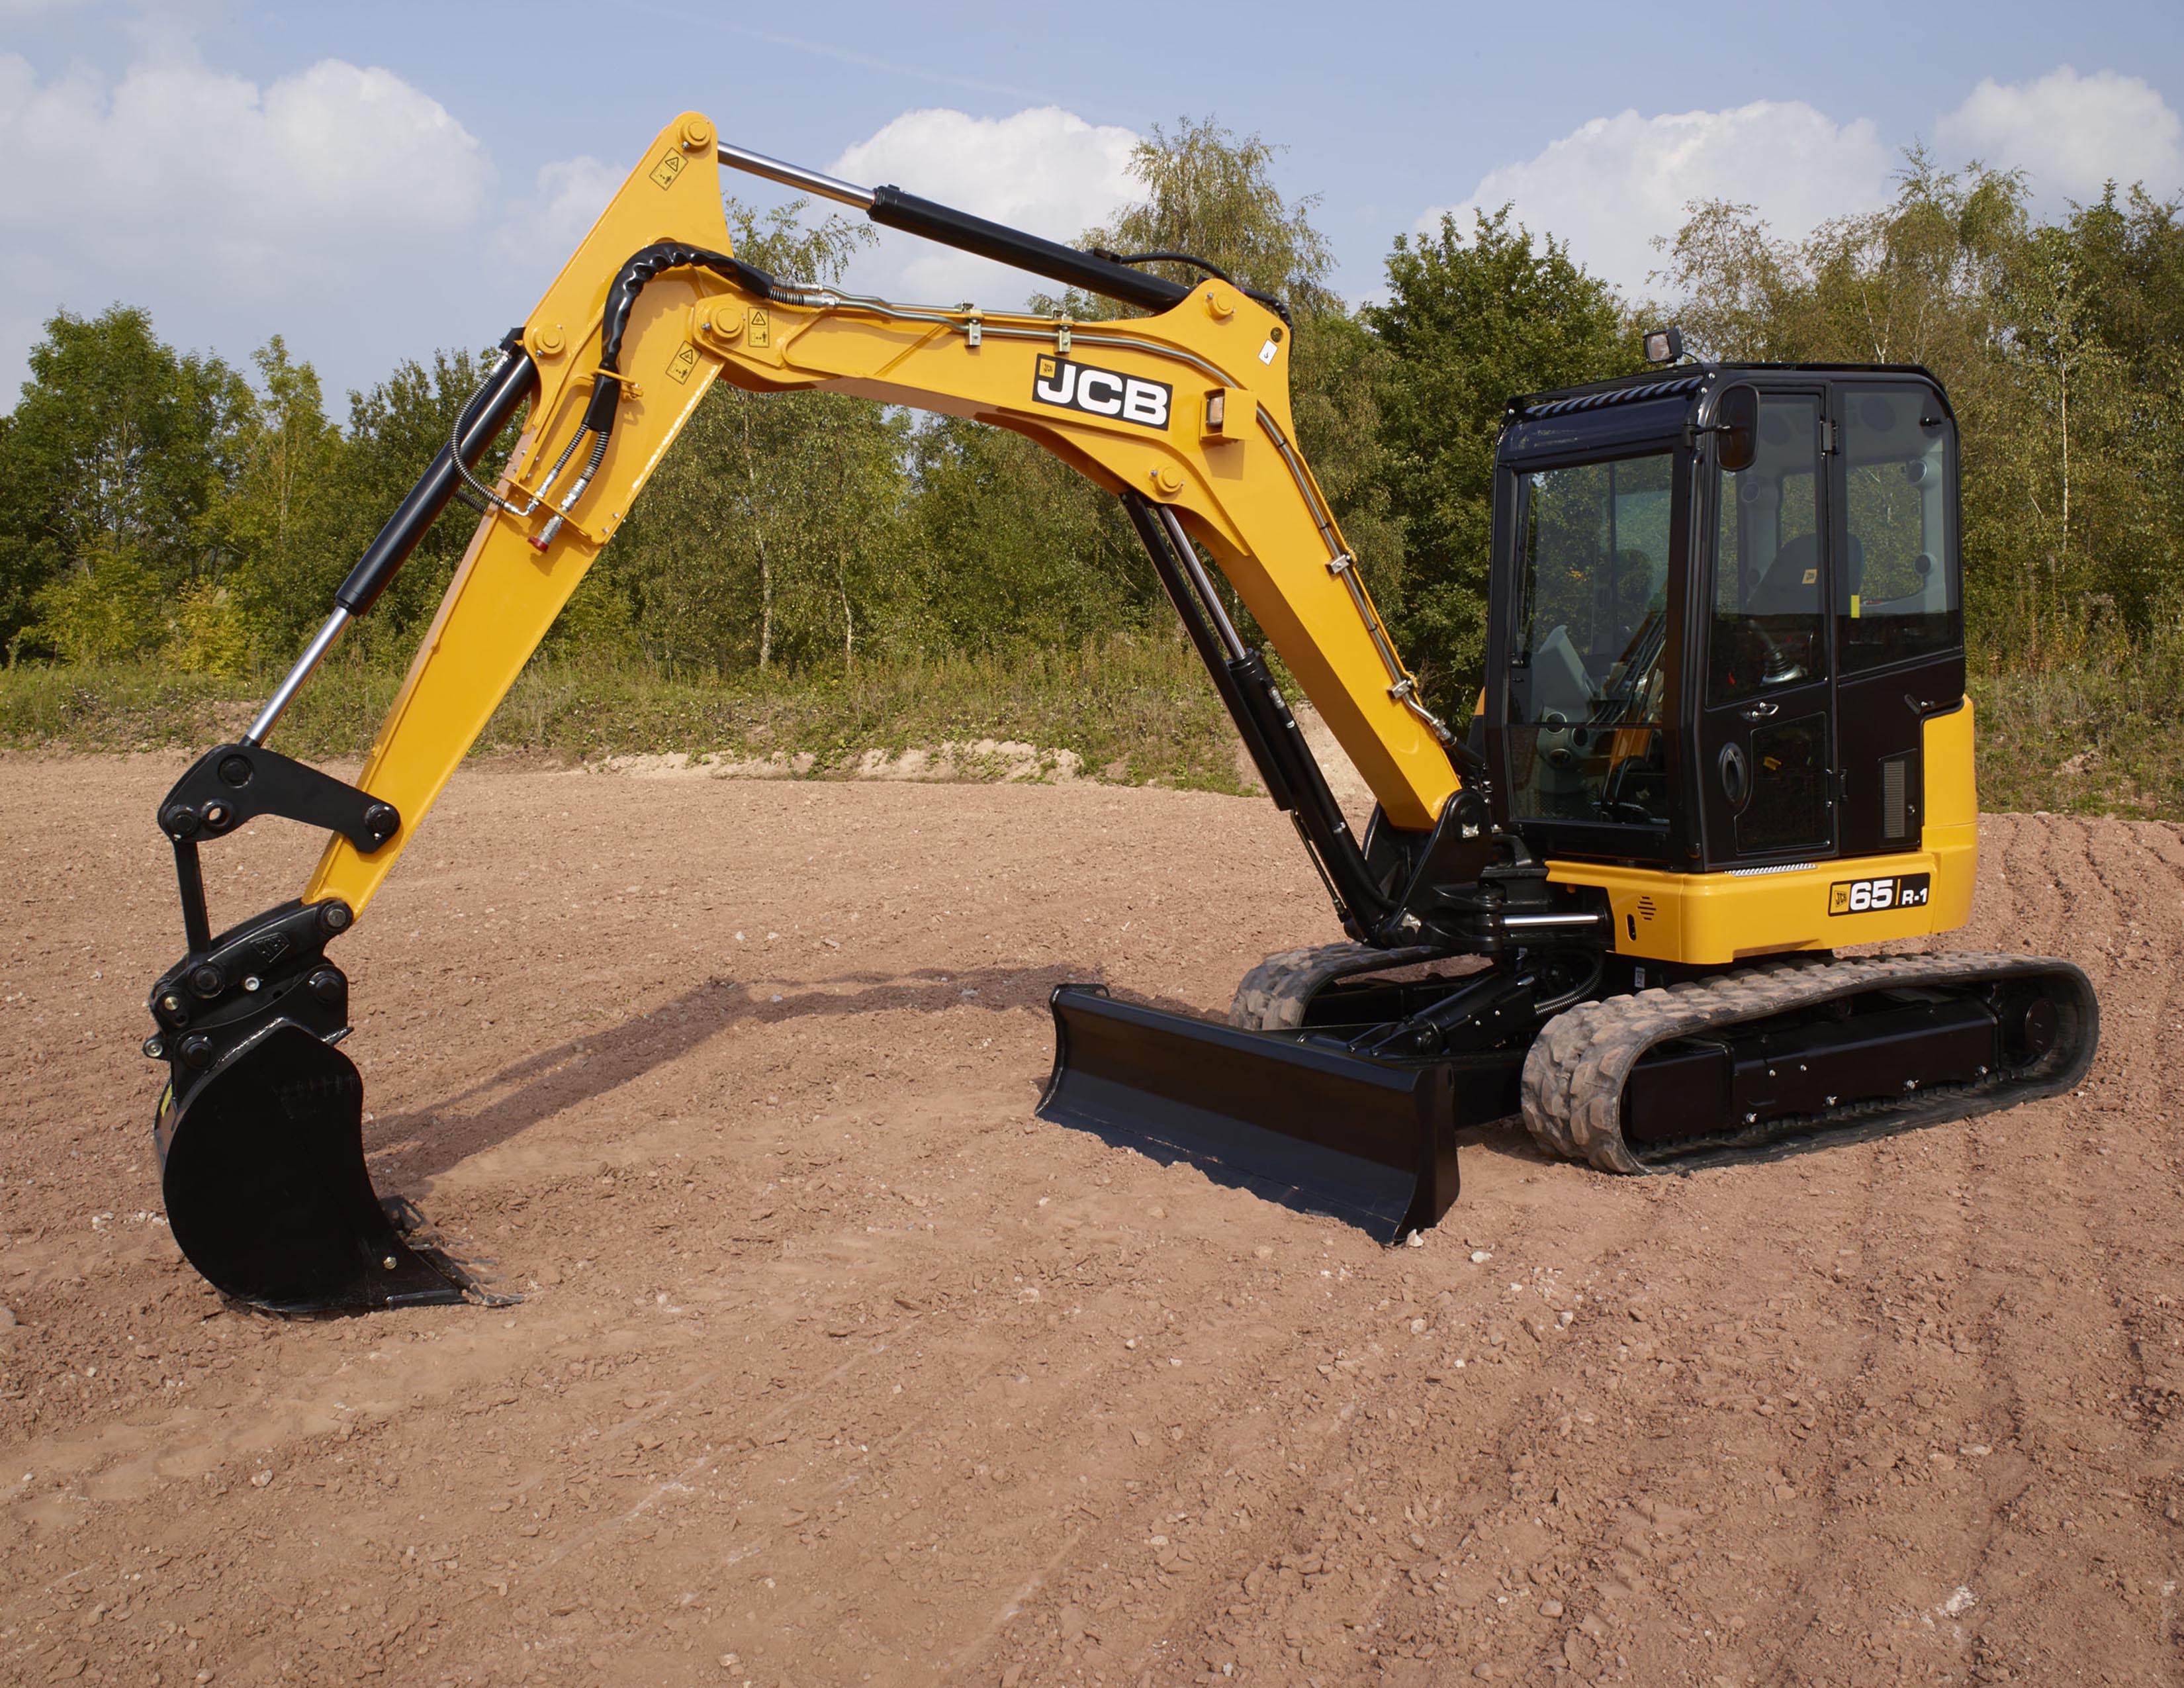 65R1 6 Ton Excavator for Sale, Small Digger